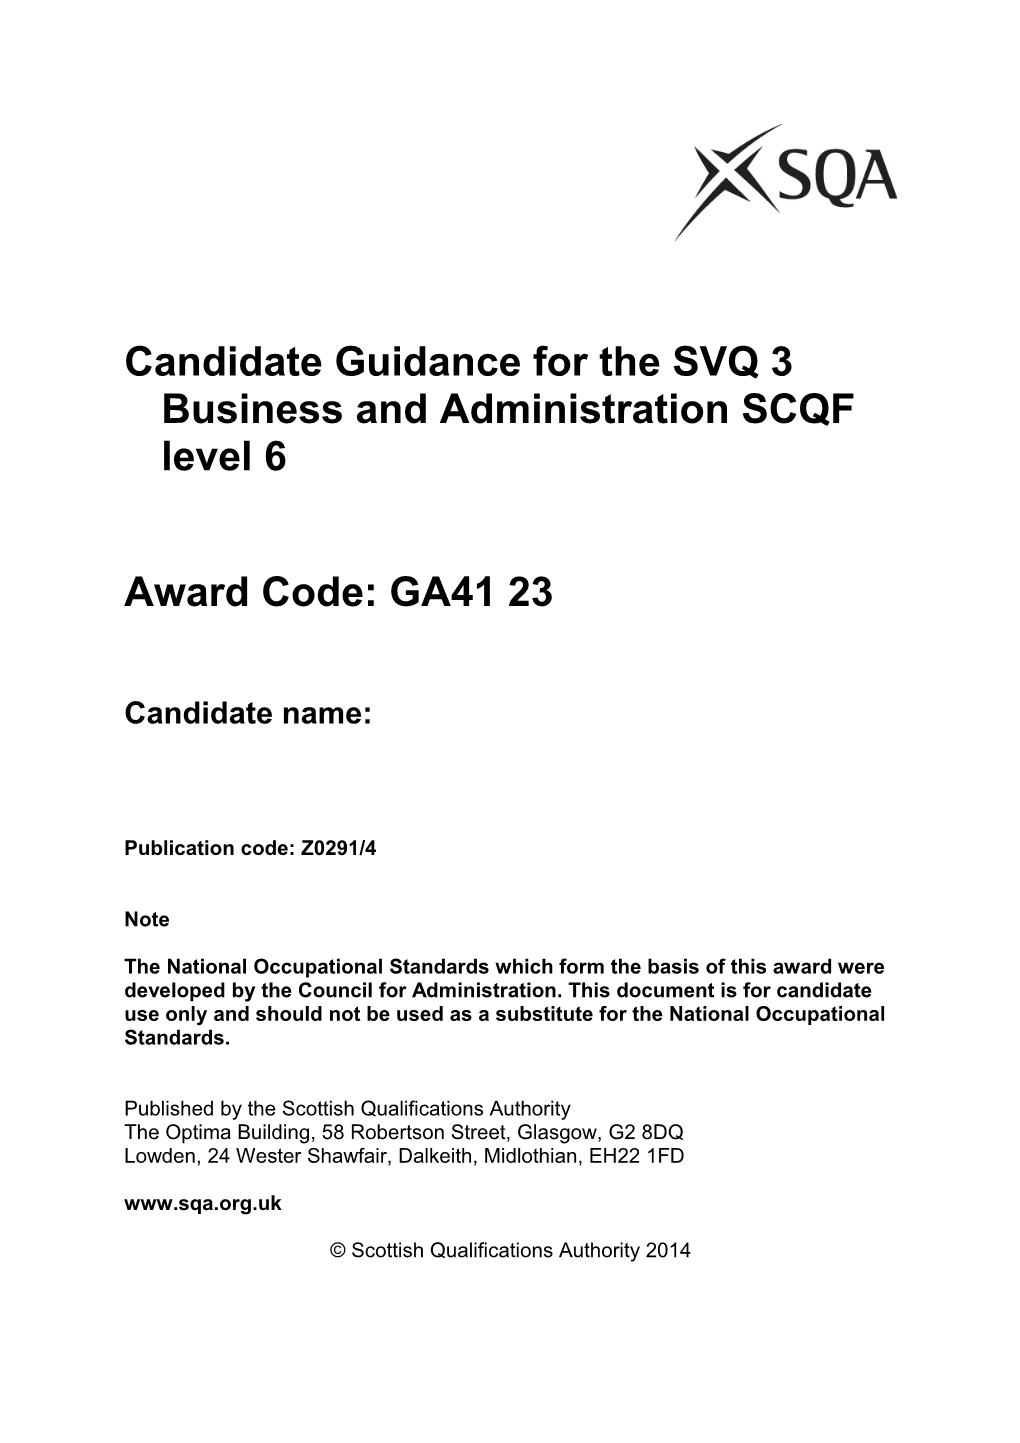 Candidate Guidance for the SVQ 3 Business and Administration SCQF Level 6